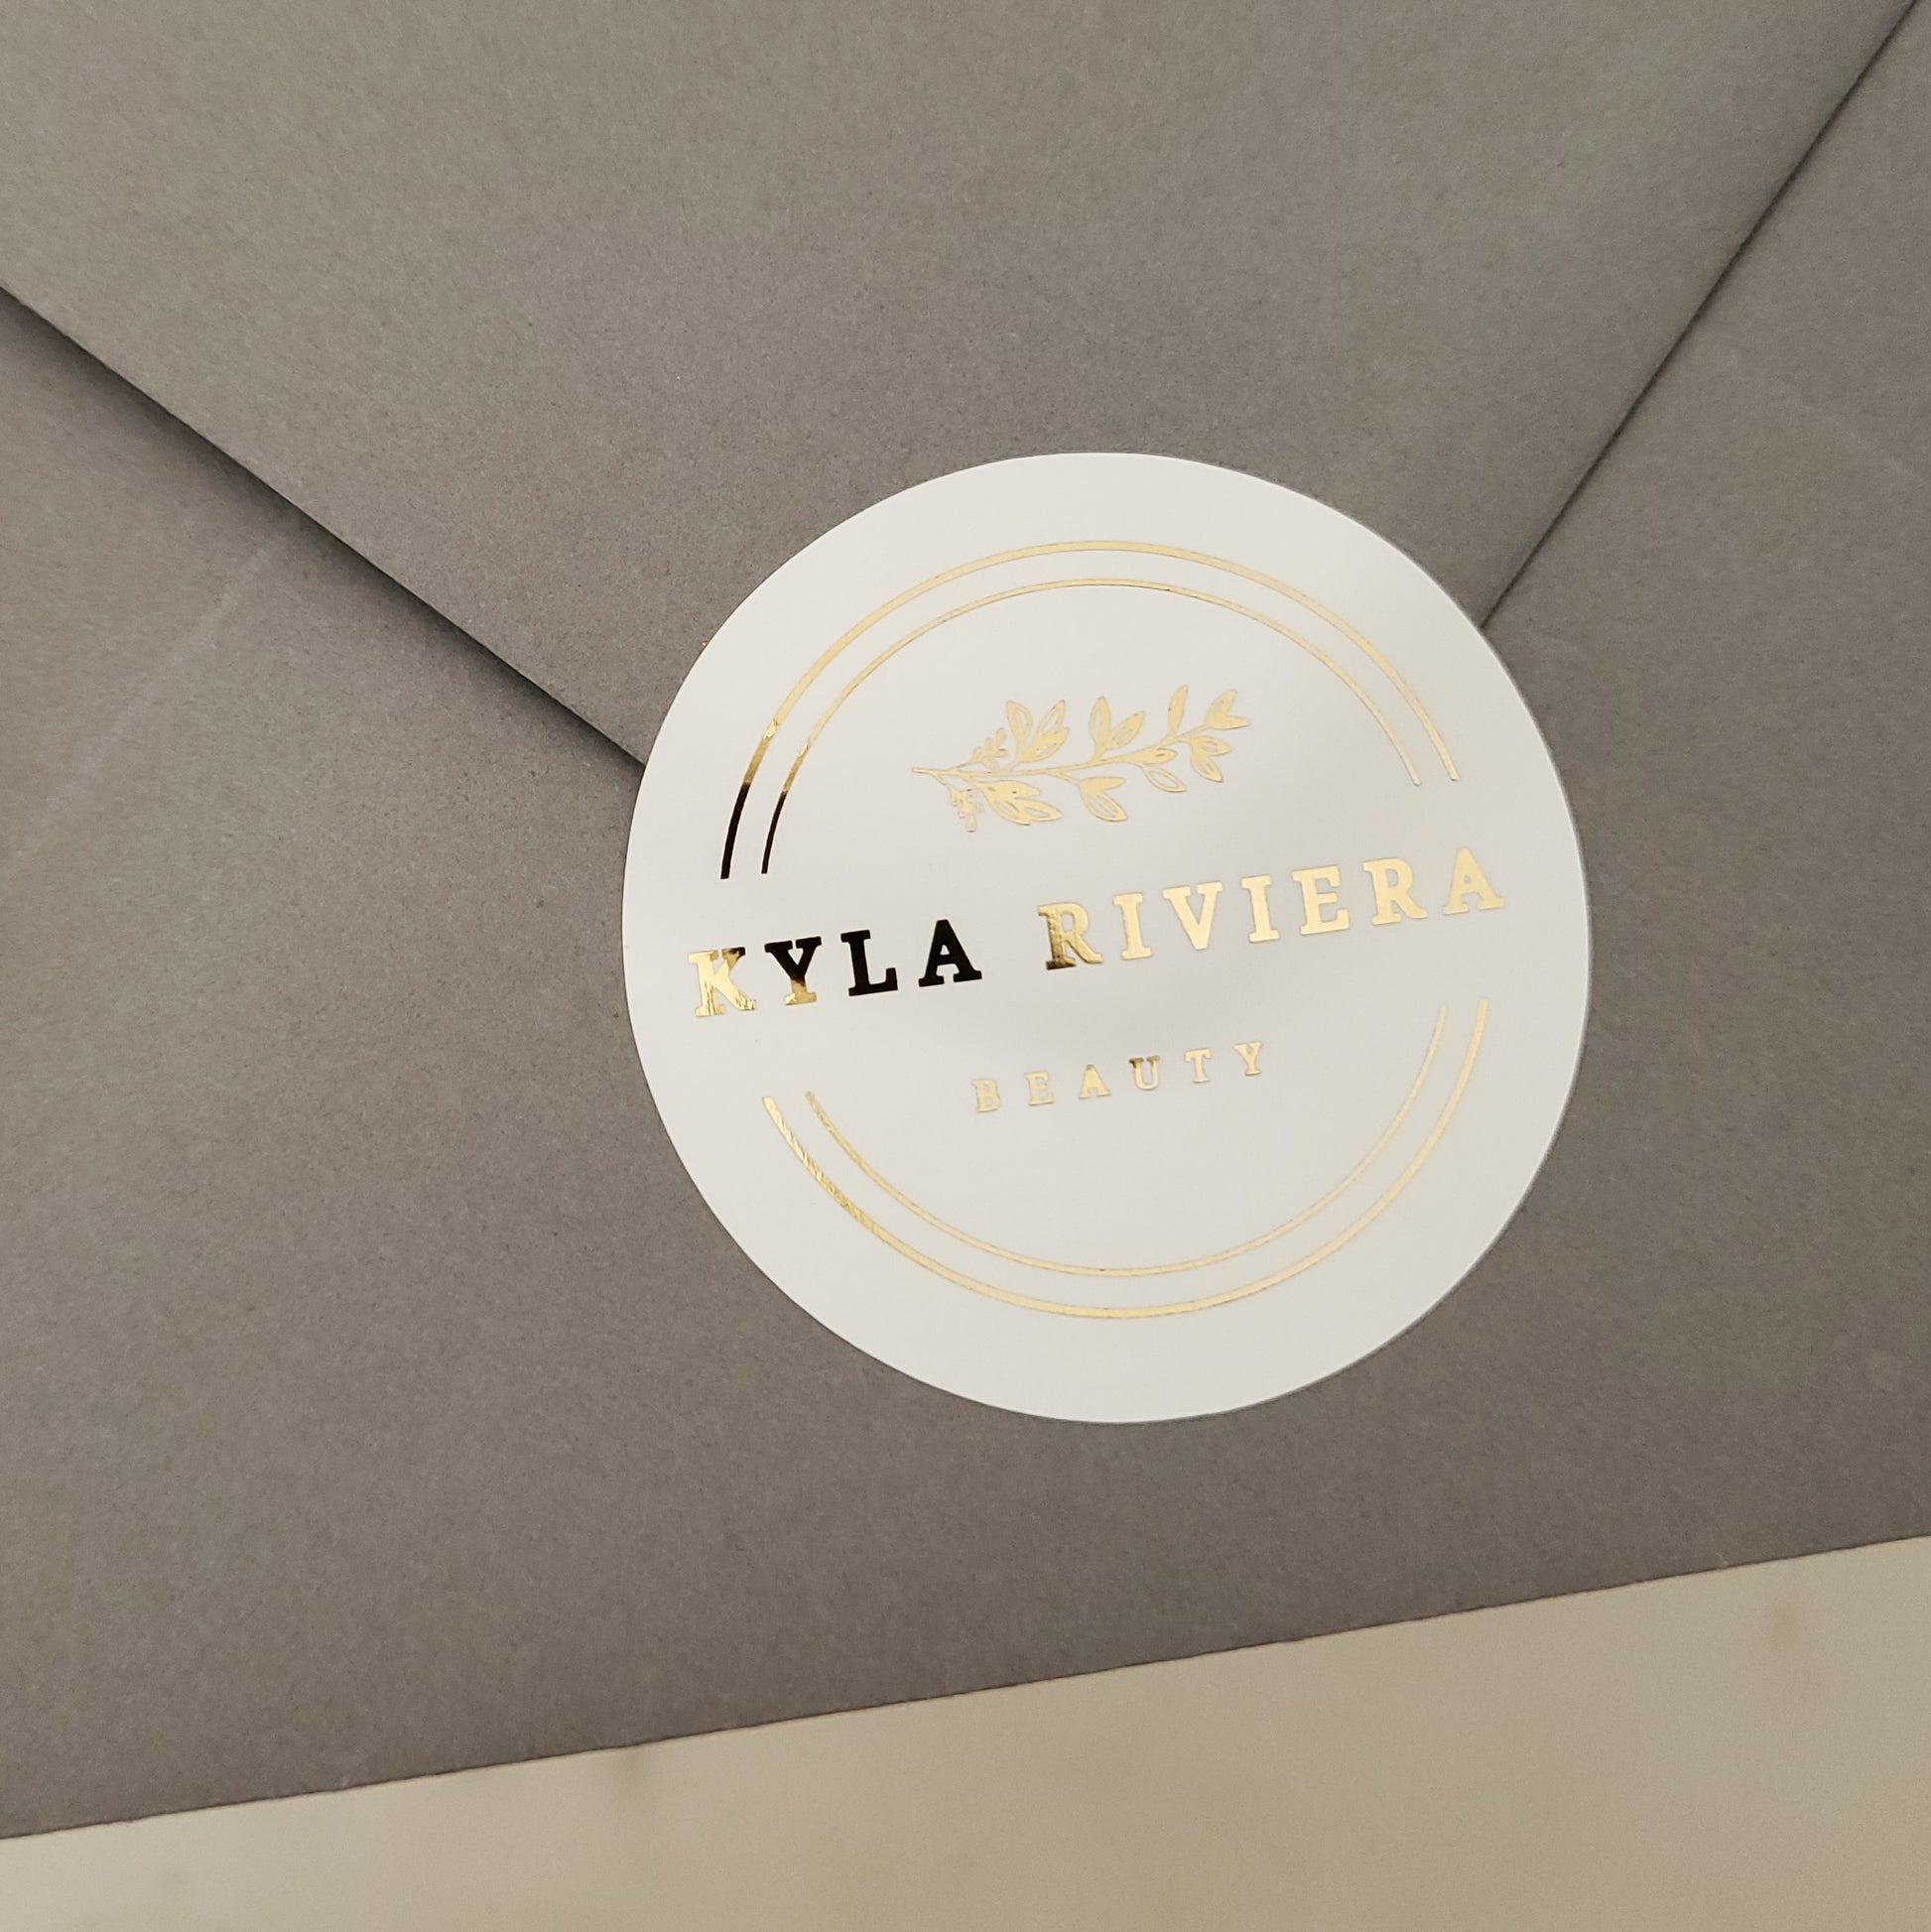 personalized product labeling sticker with gold foil for small businesses - XOXOKristen